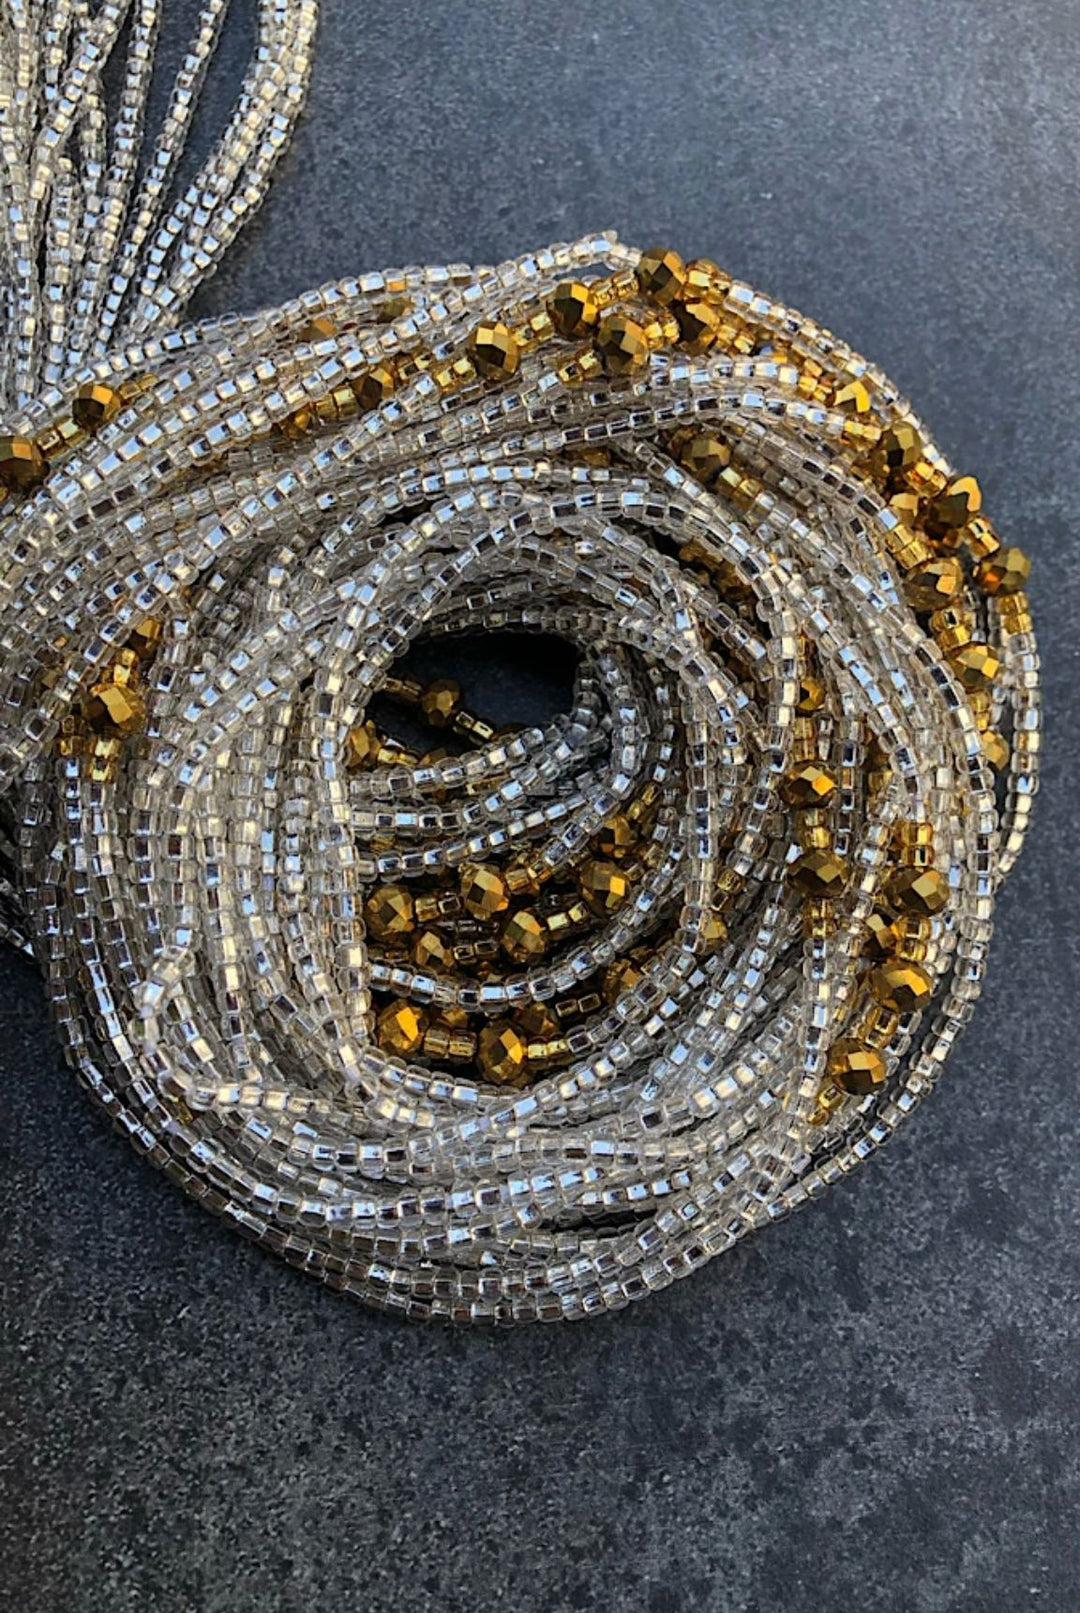 Goddess👸🏾 Silver and Gold waist beads 🔥 plus size waist beads. Fit up to 3x🔥